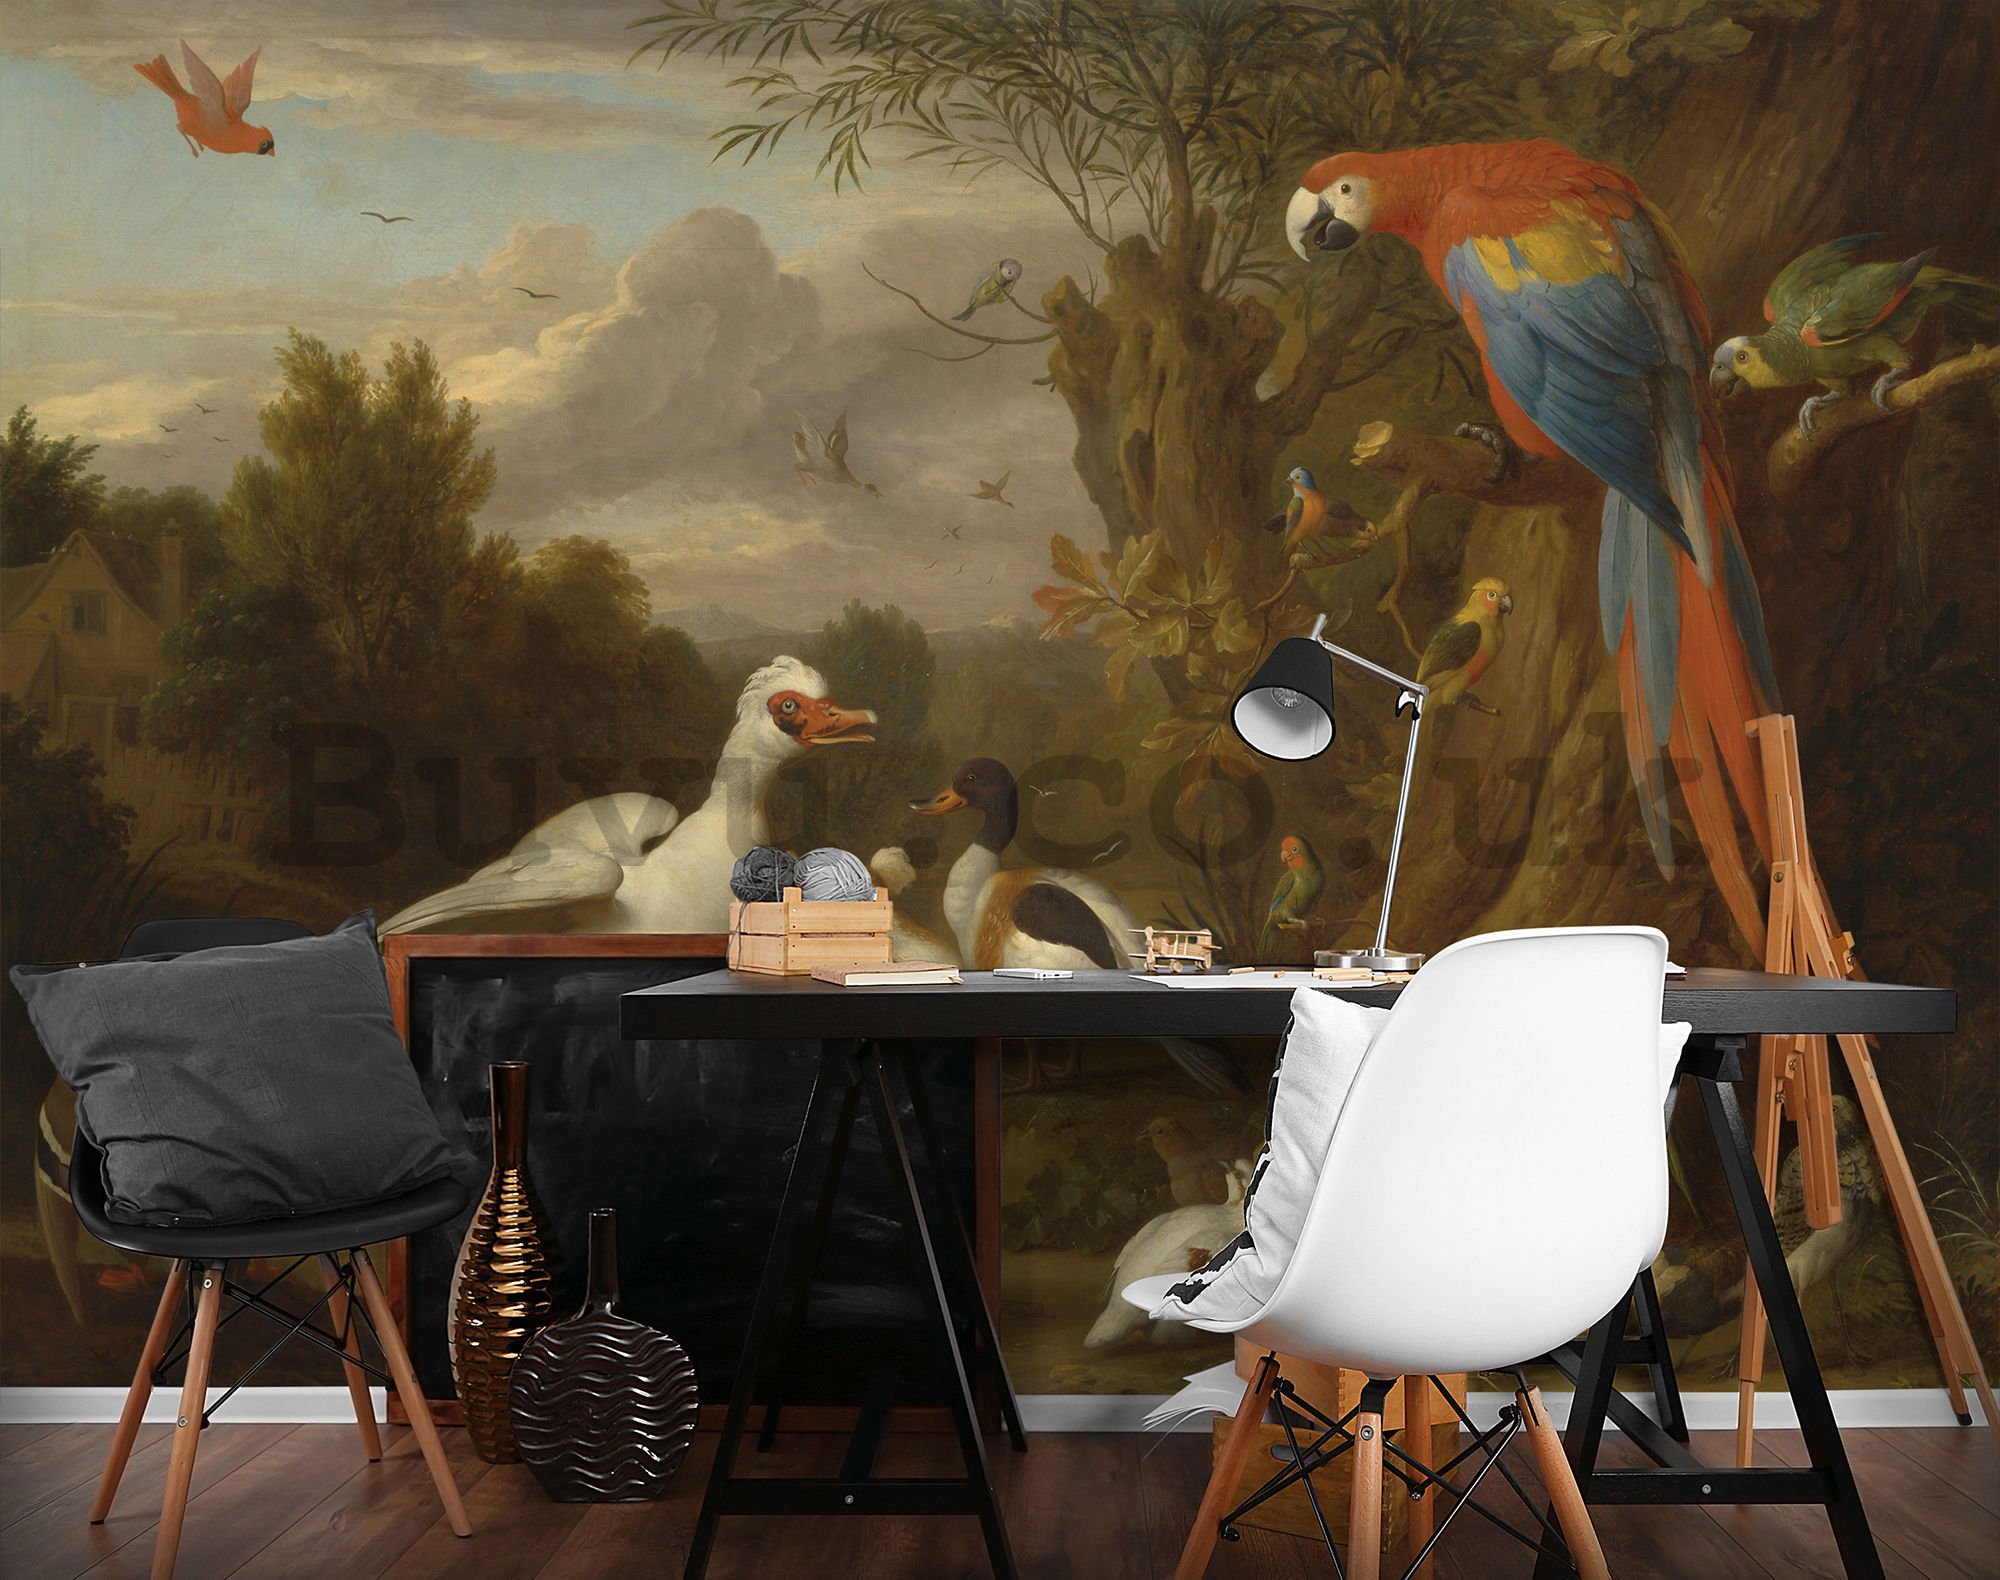 Wall mural: Ducks, Parrots, and Other Birds in a Landscape - 184x254 cm